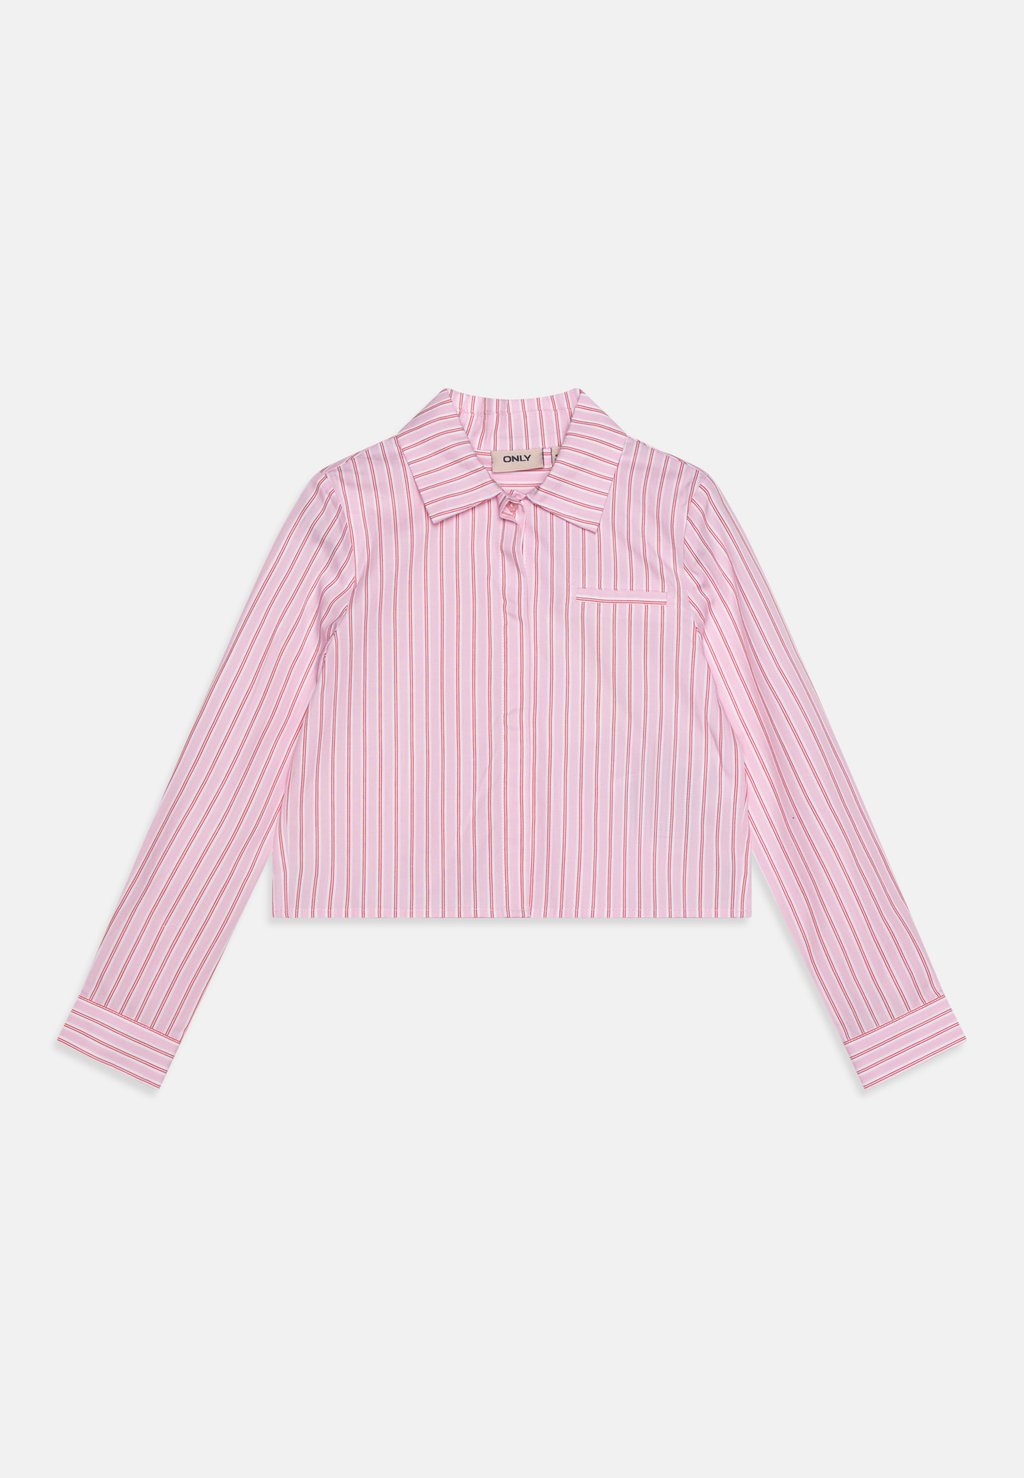 Рубашка Kogholly Michelle Stripe Crop Kids ONLY, цвет begonia pink/bright white/flame scarlet